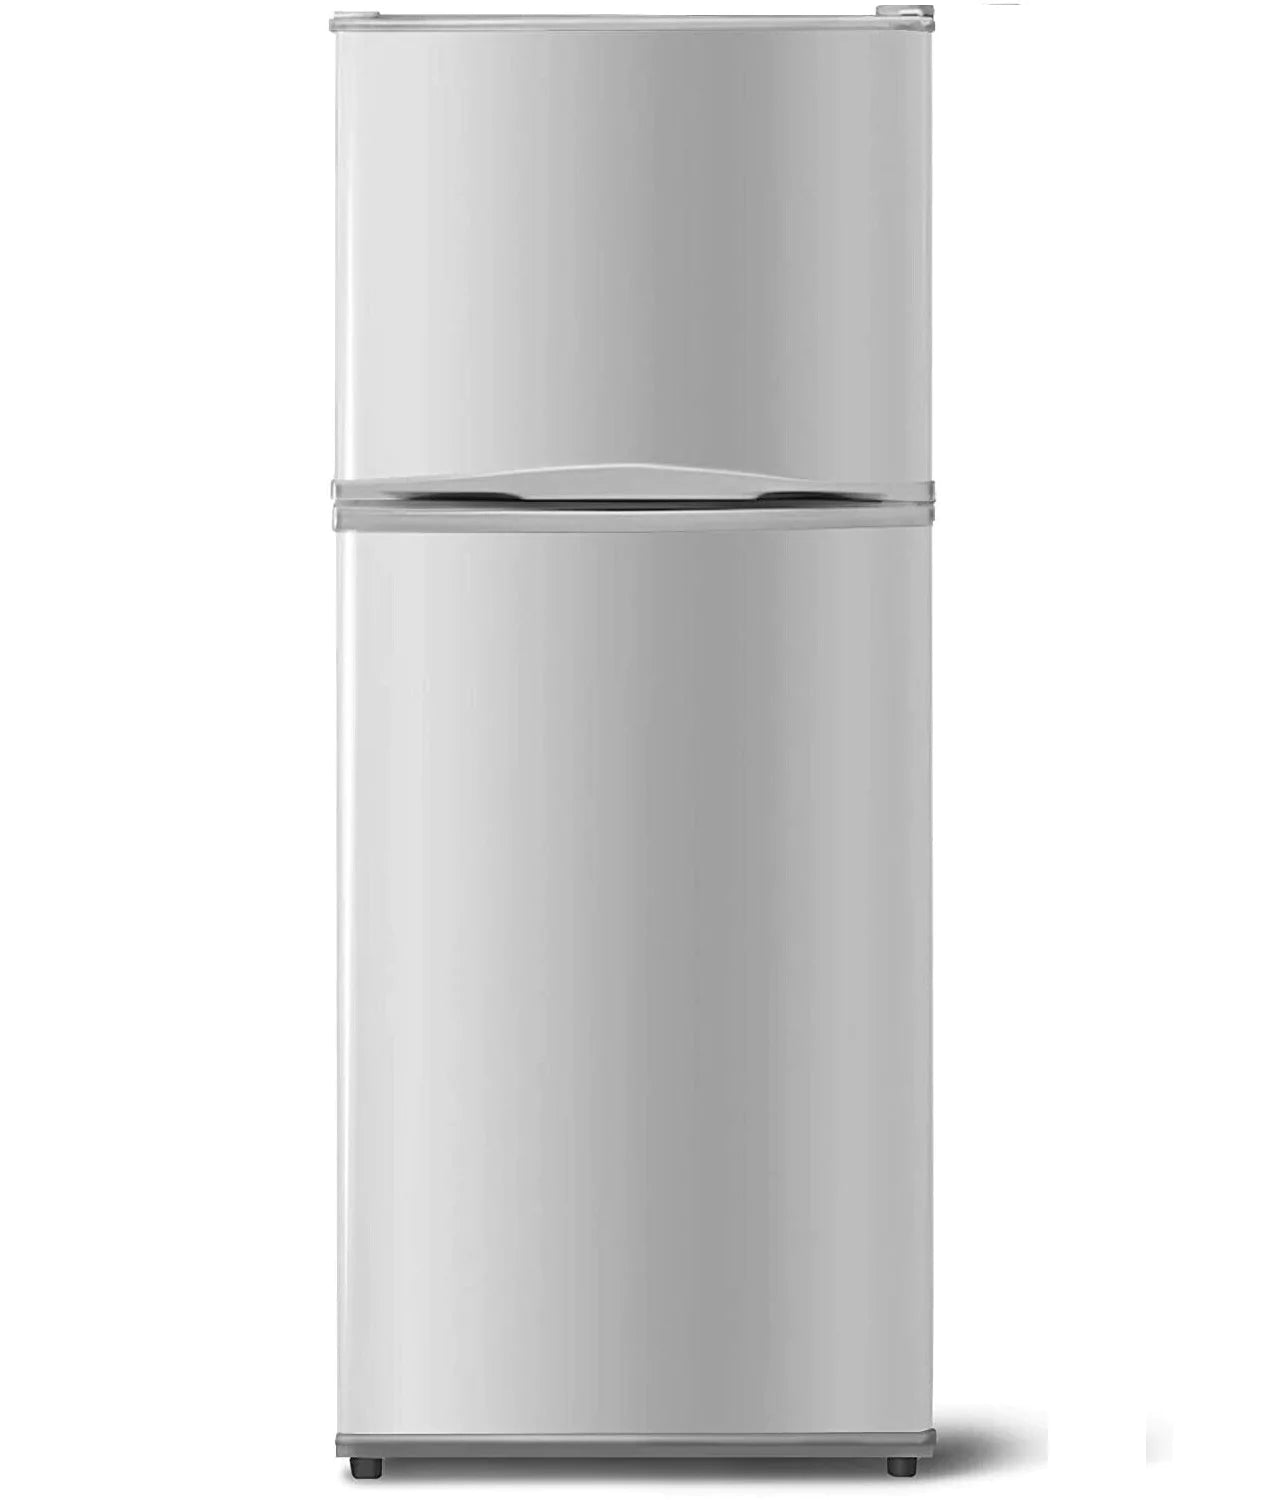 SMAD 12 cu.ft Top-Freezer Reversible Door Refrigerator Color Stainless Steel/Silver - front view